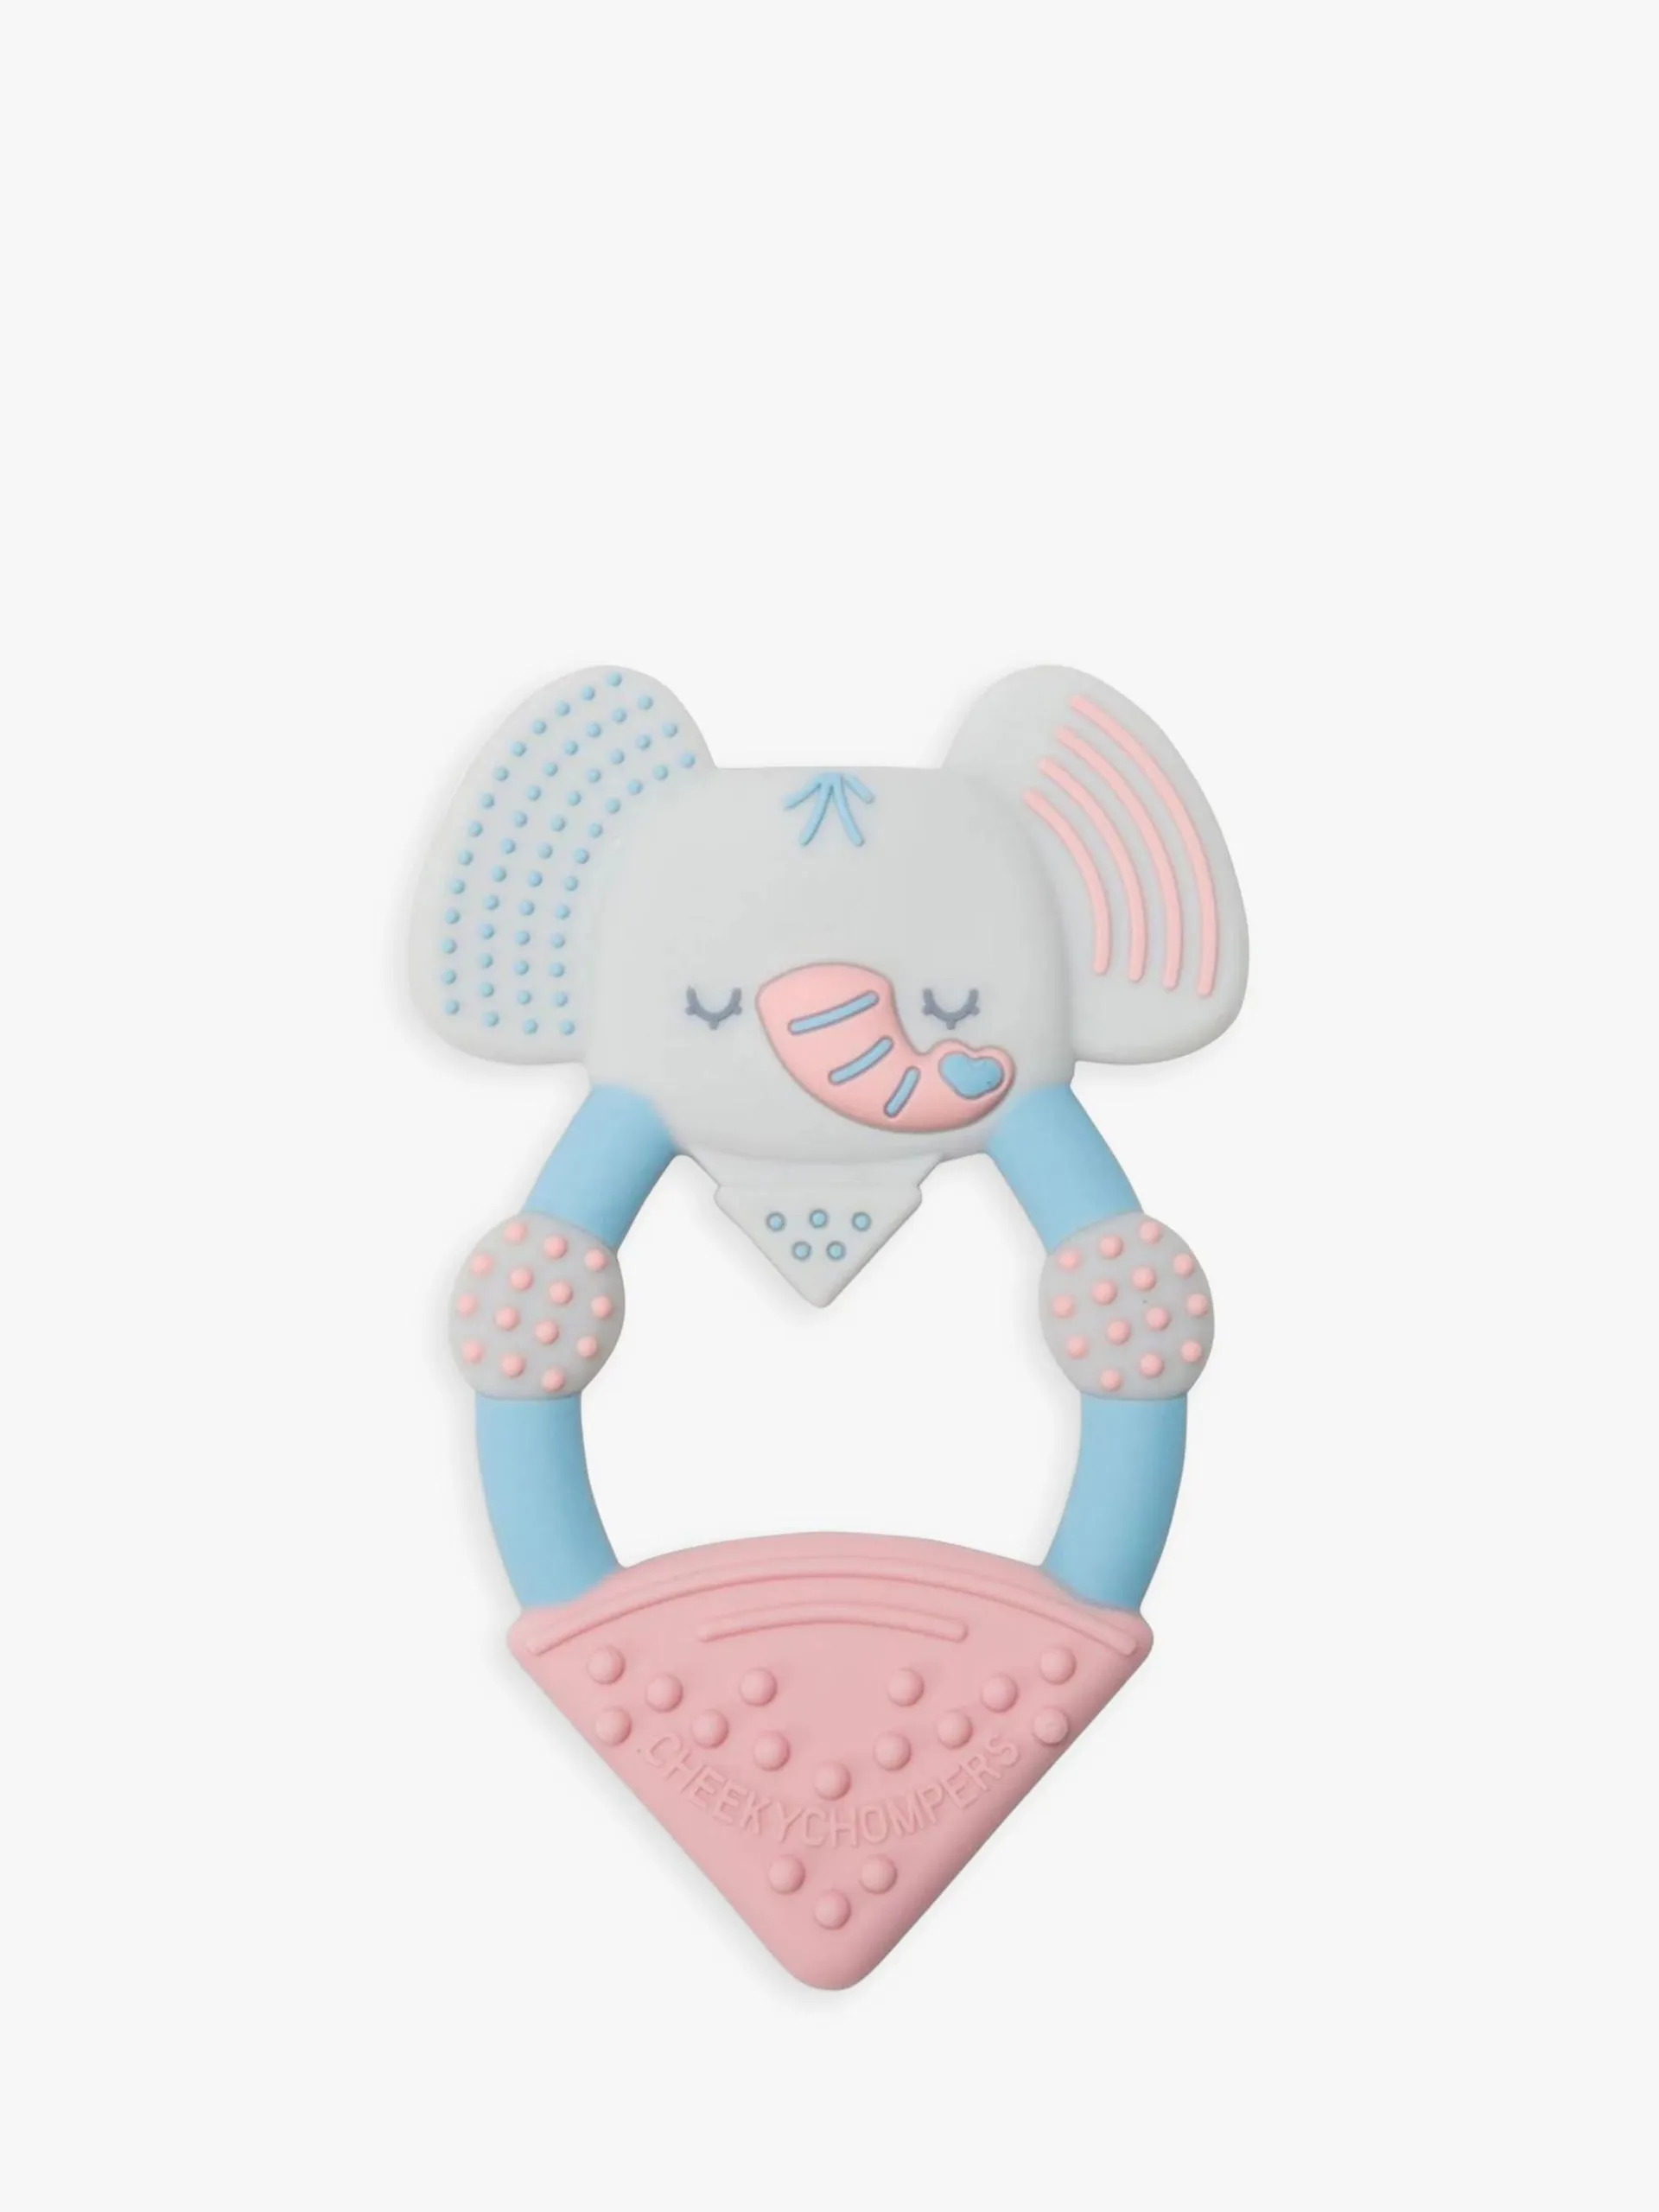 Cheeky Chompers Animal Teether, Darcy the Elephant